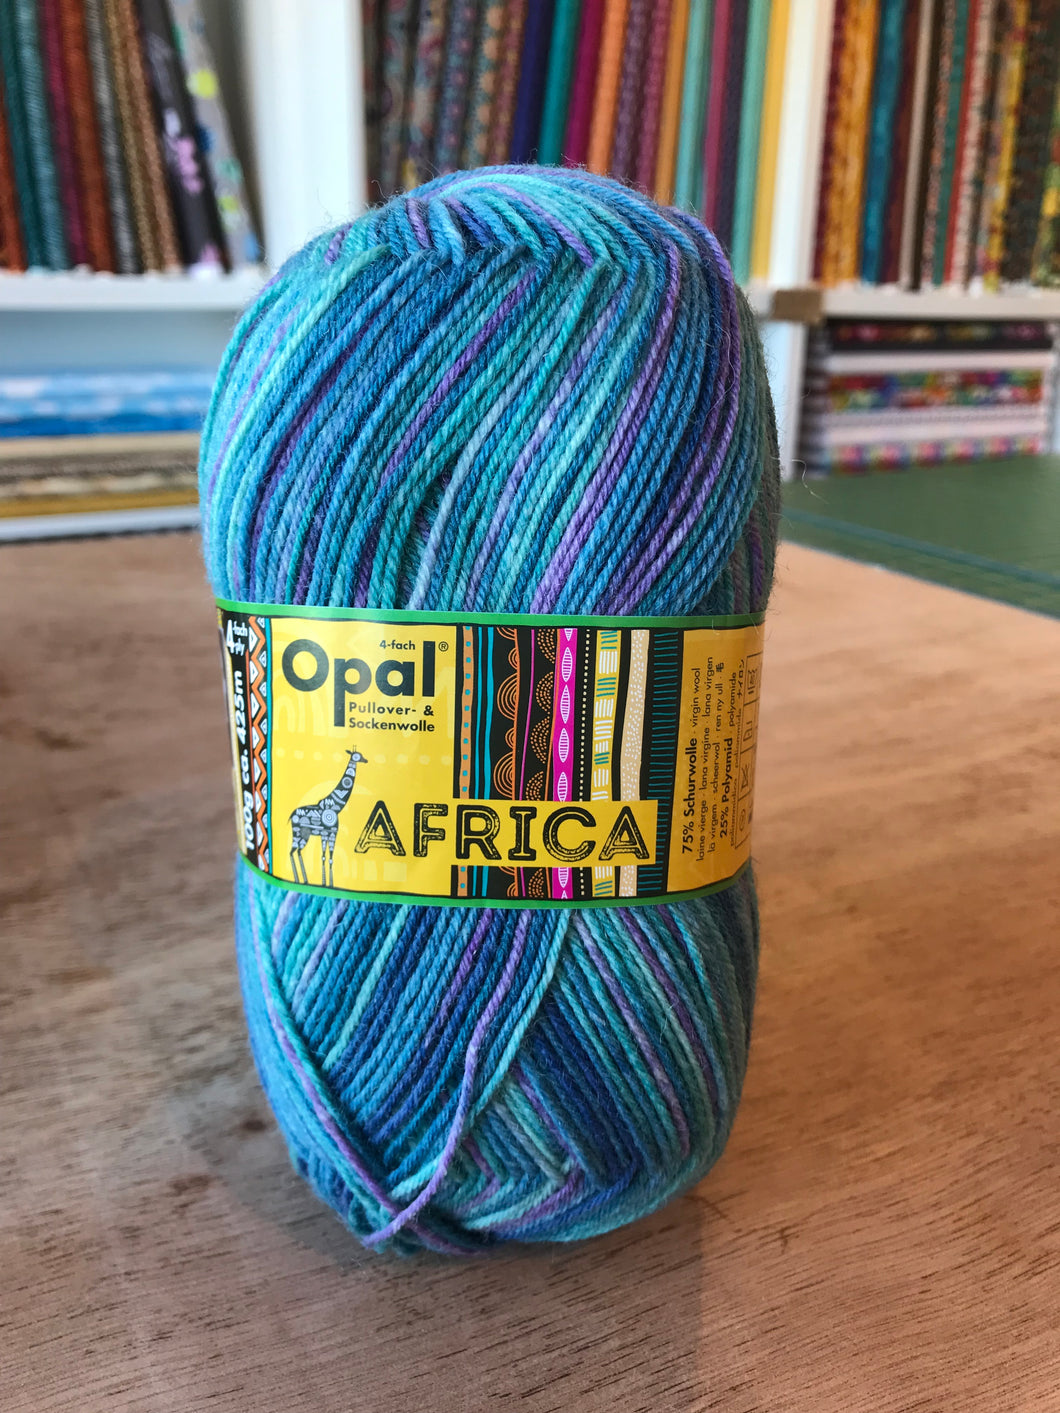 Opal - Africa - 4ply - Shade 11164